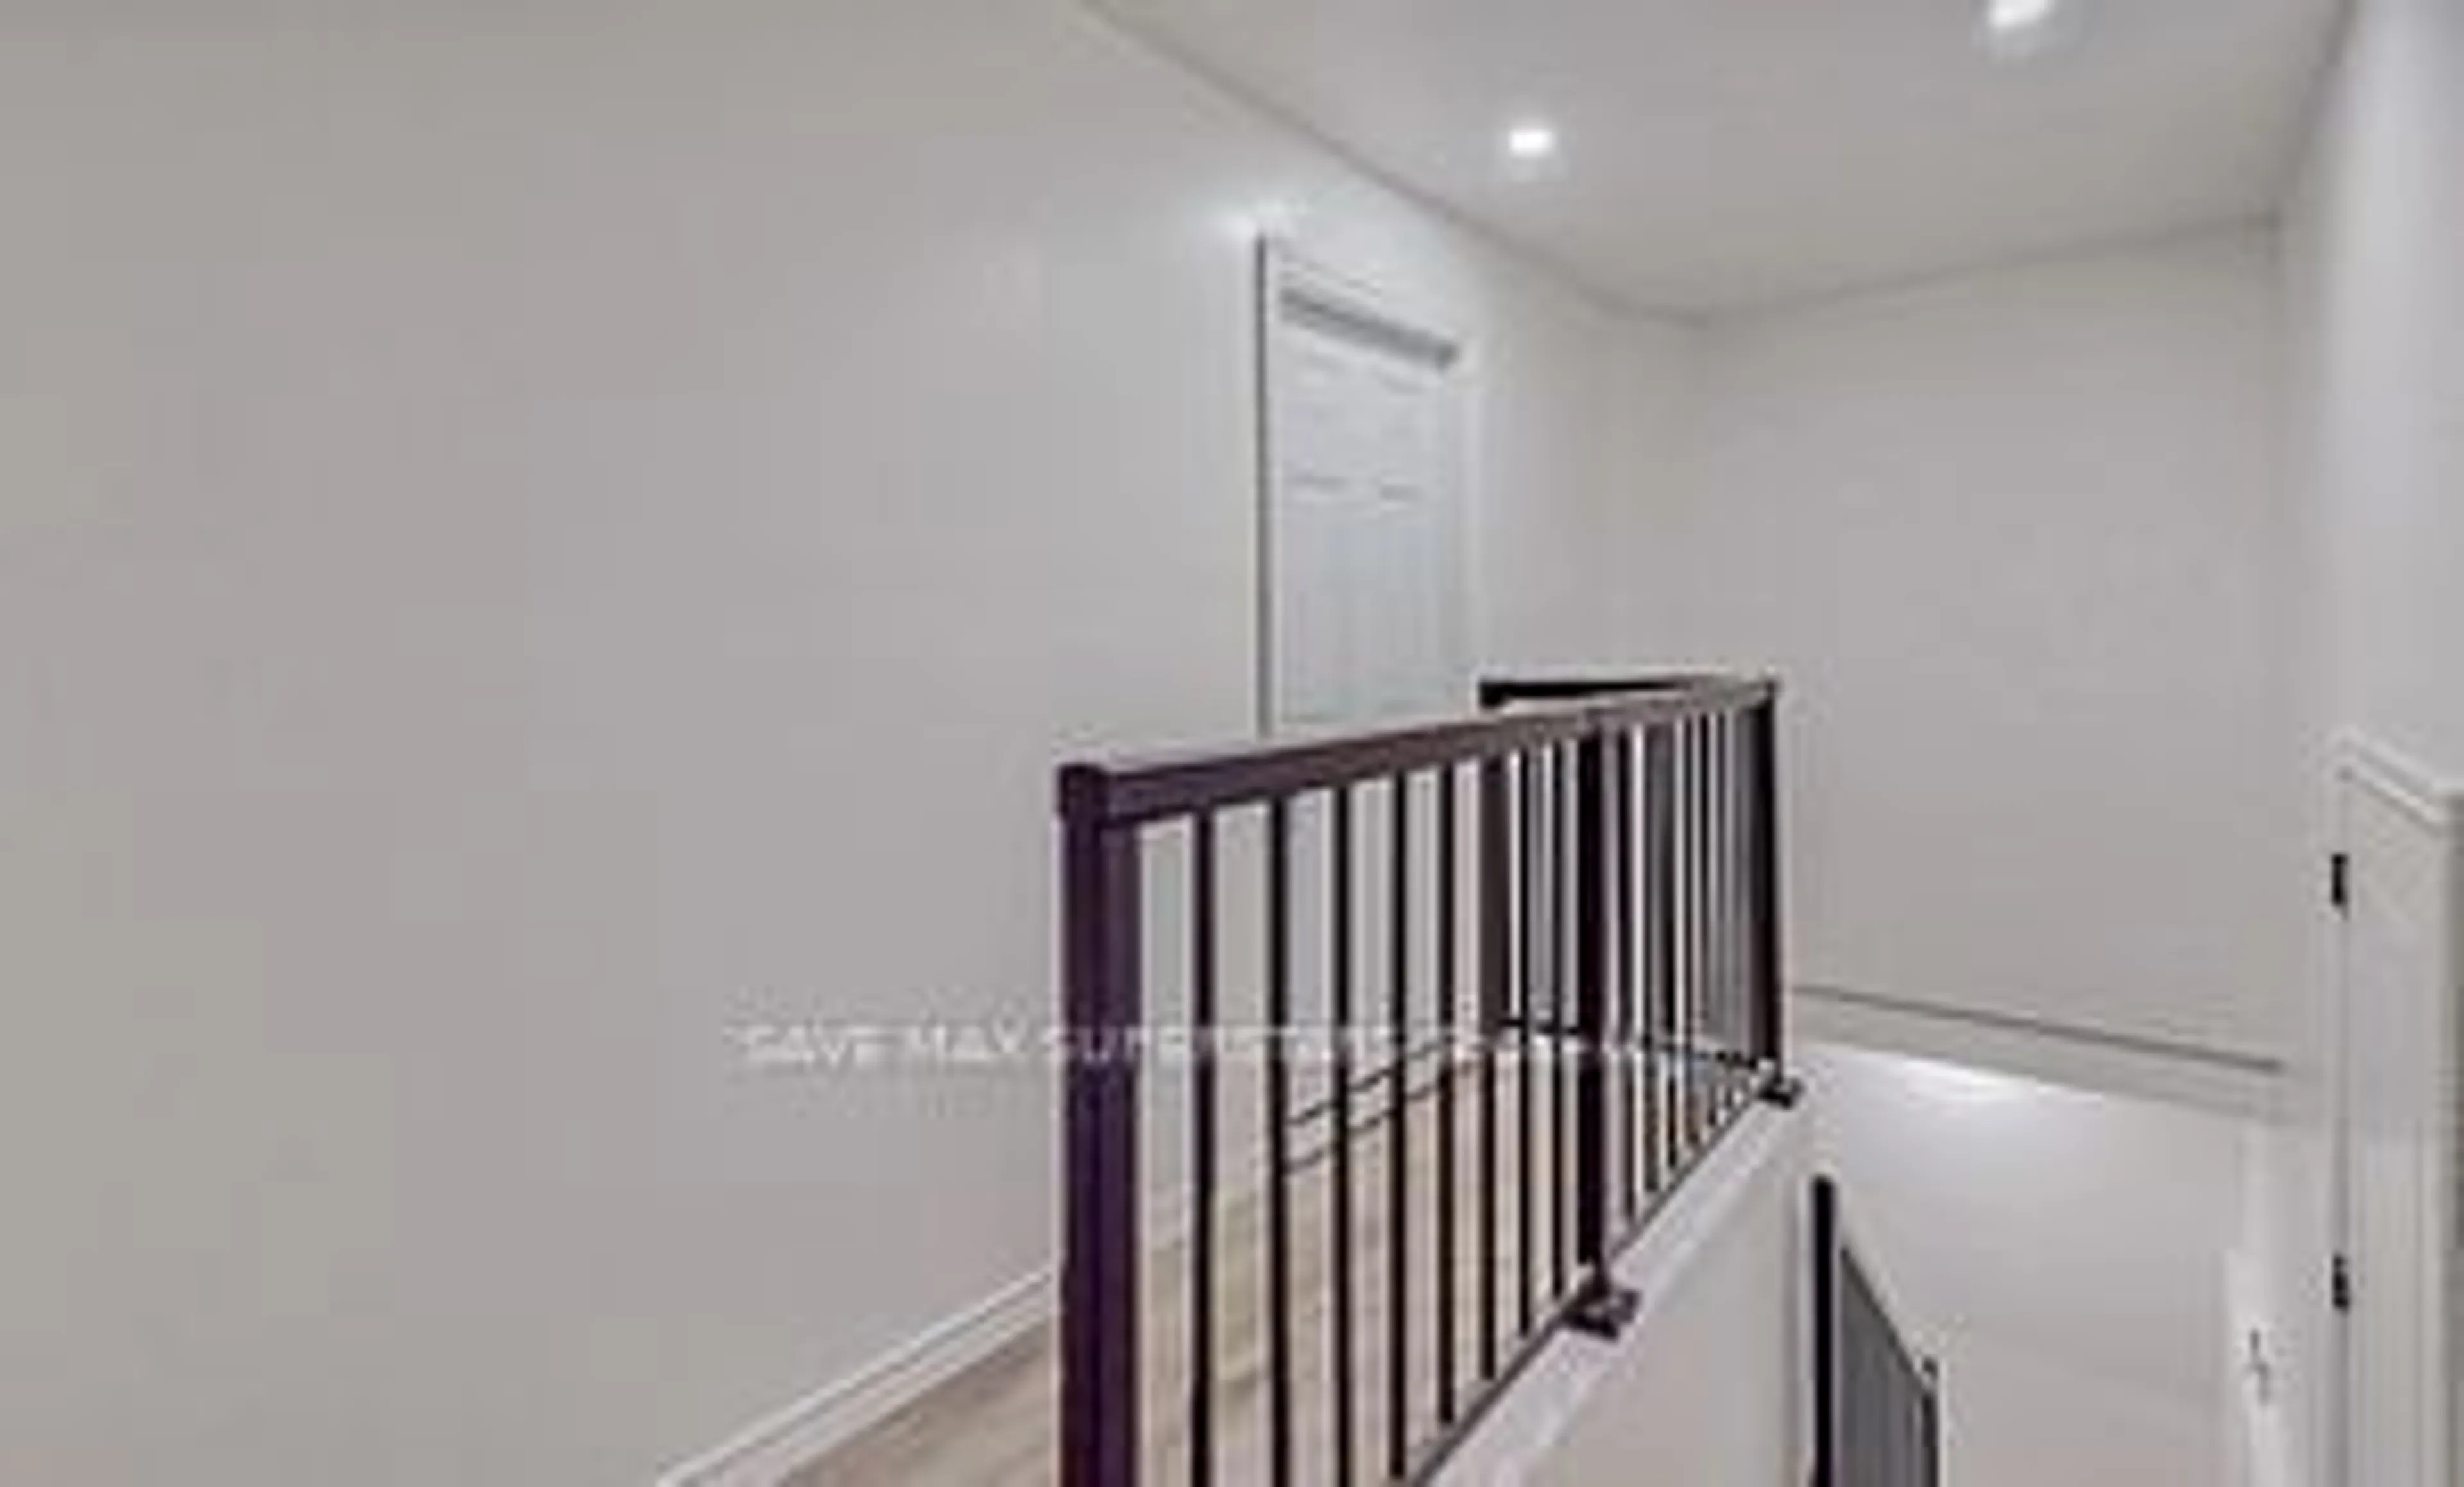 Stairs for 7 Barwick Dr #Duplex, Barrie Ontario L4N 6Z7